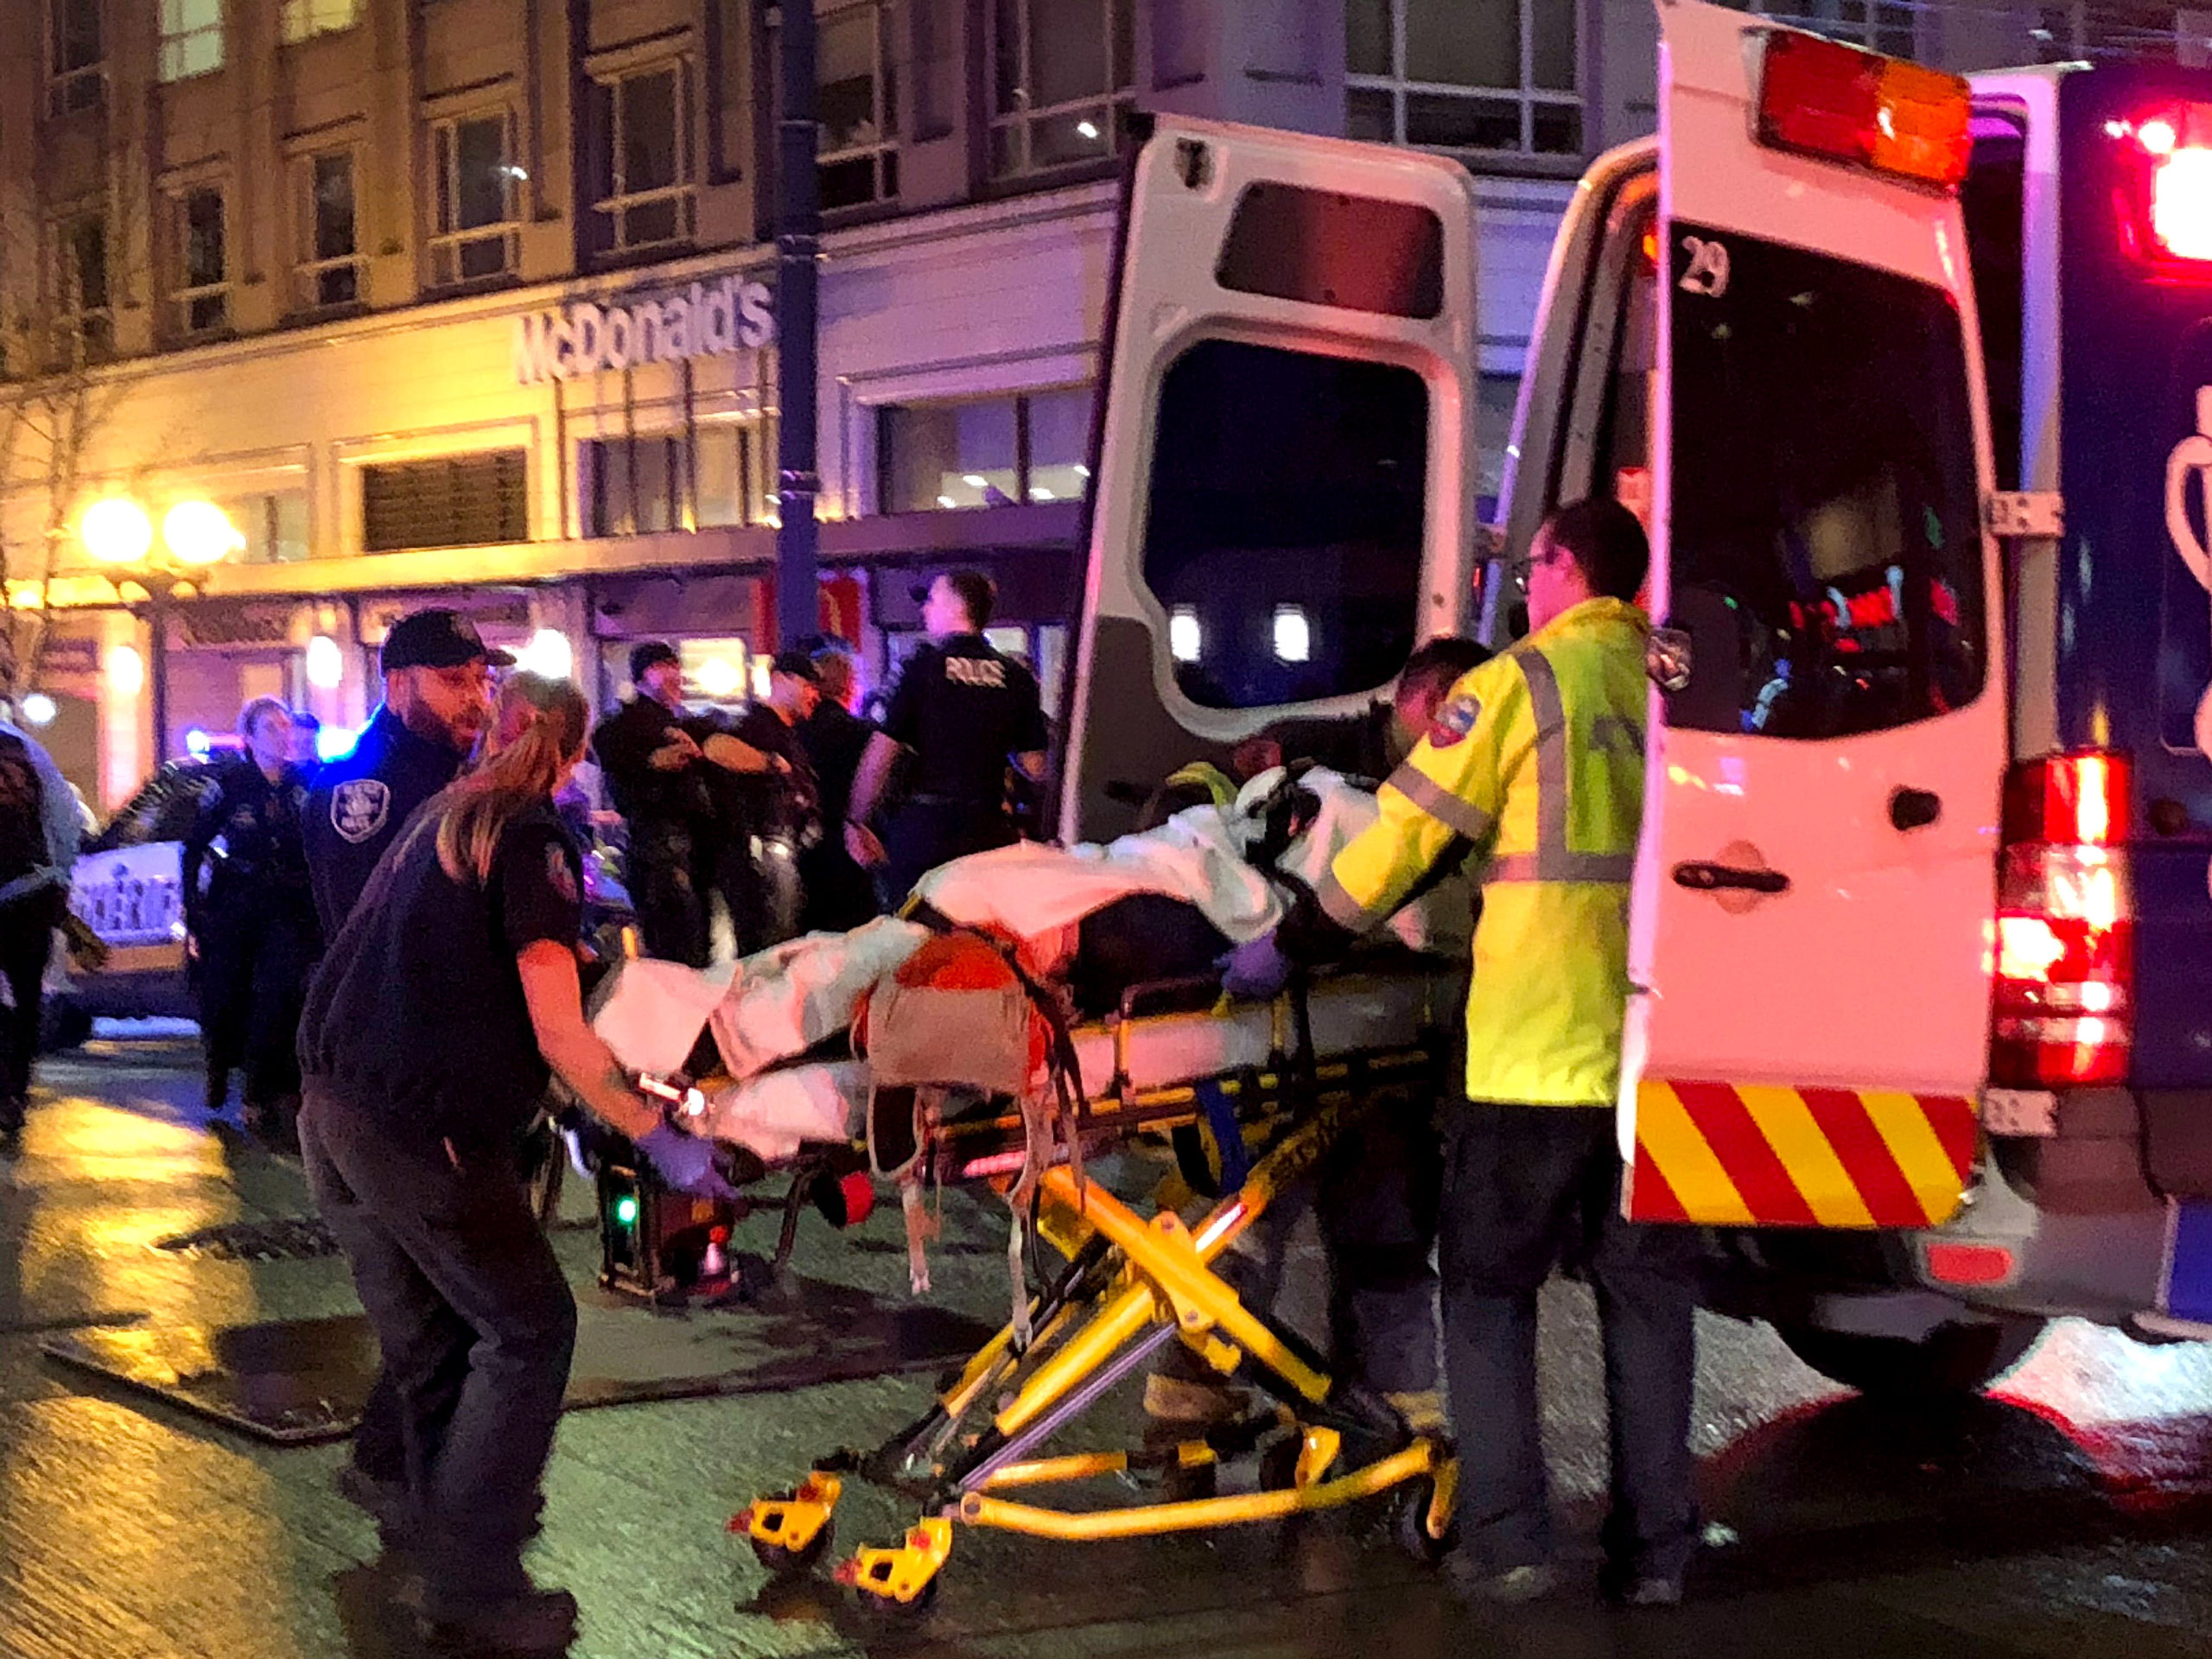 EMT and Police give first aid to a shooting victim in downtown on January 22, 2020 in Seattle, Washington. (Photo by Chris Porter/Getty Images)